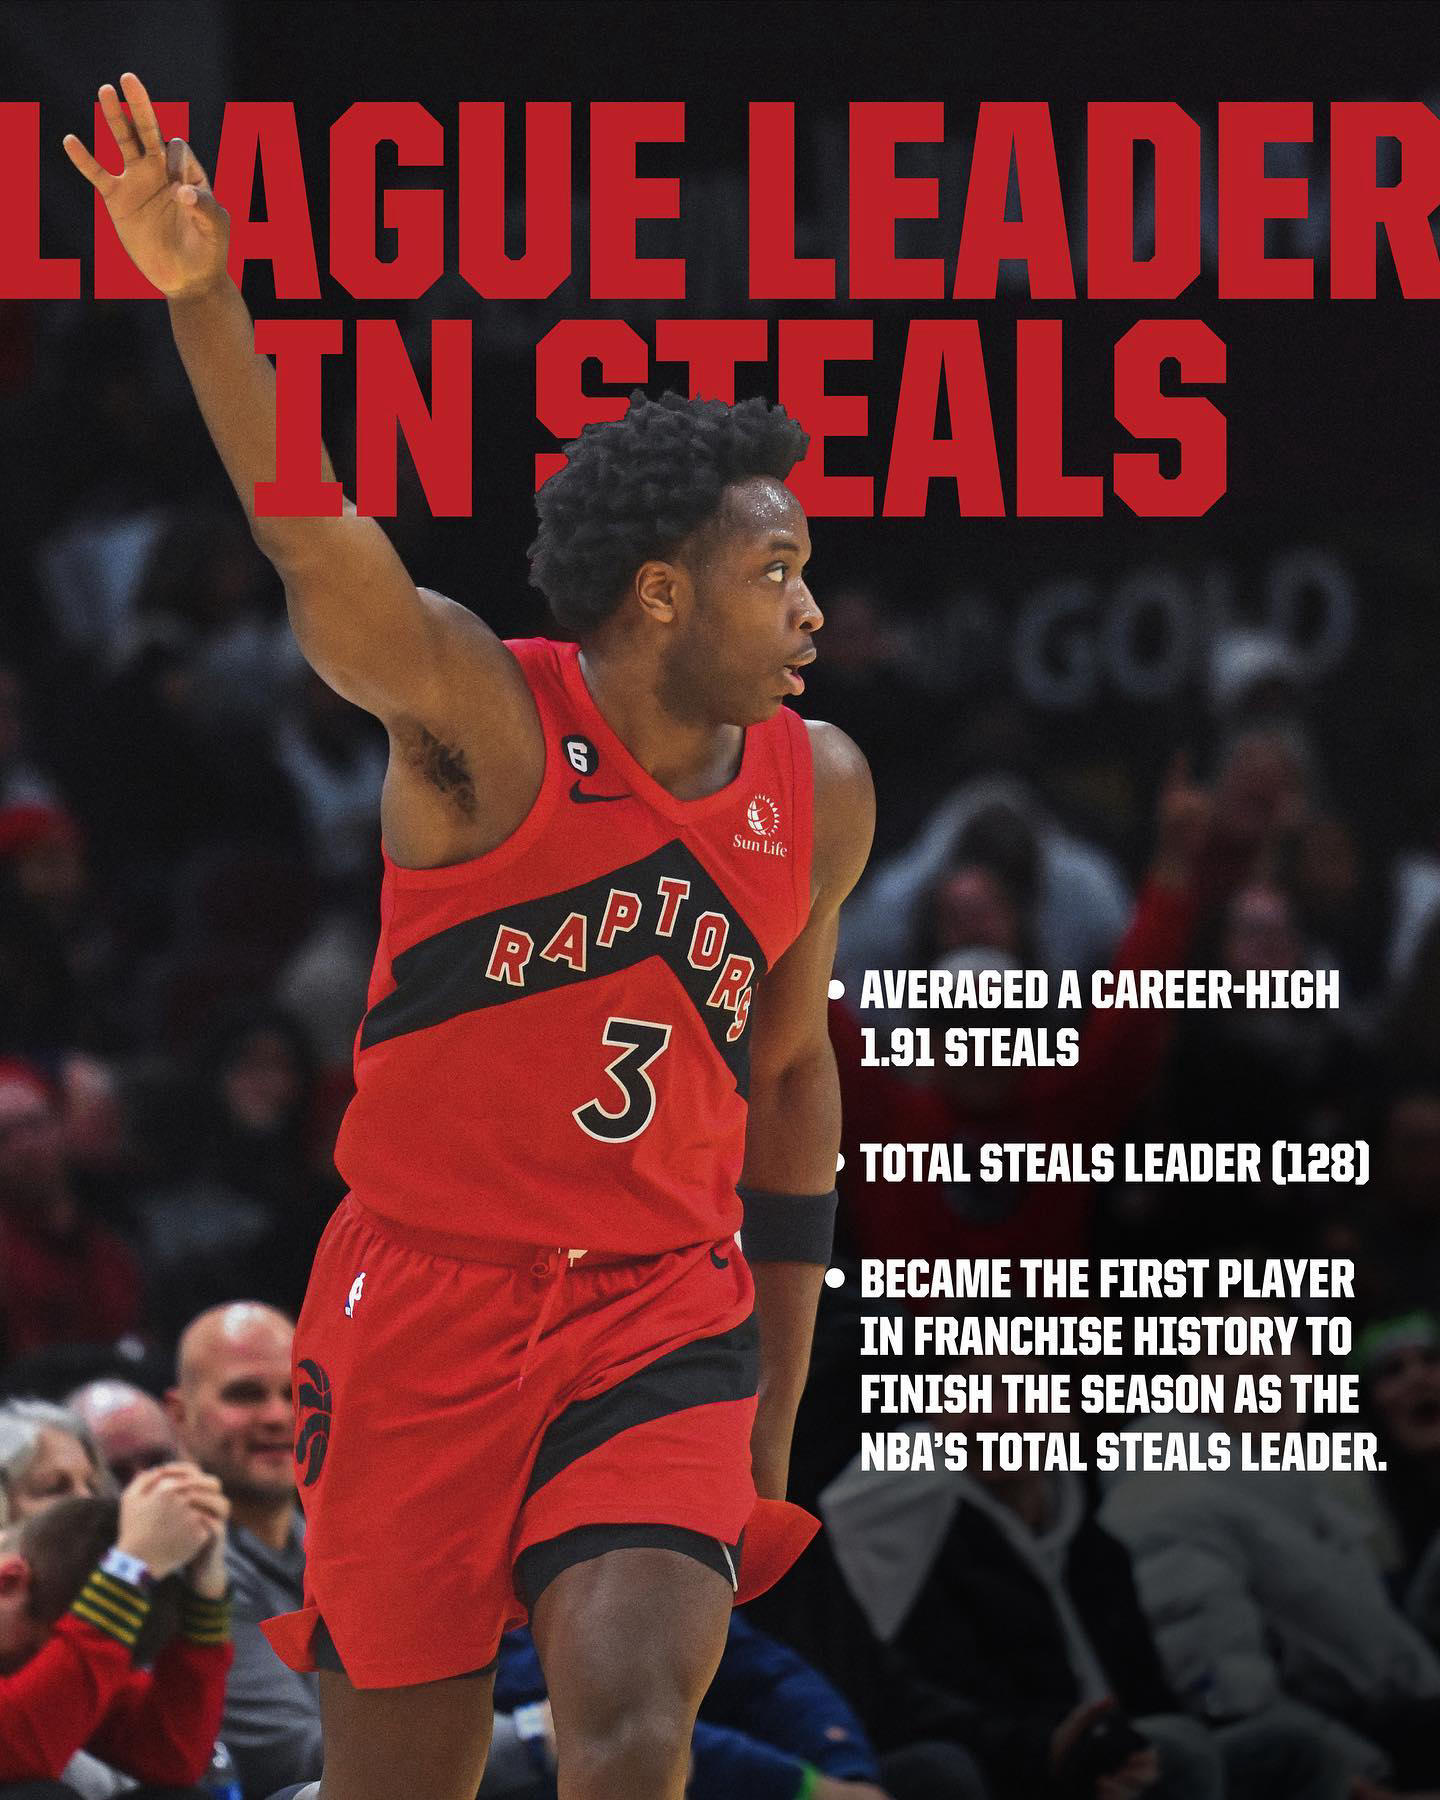 League leader in steals